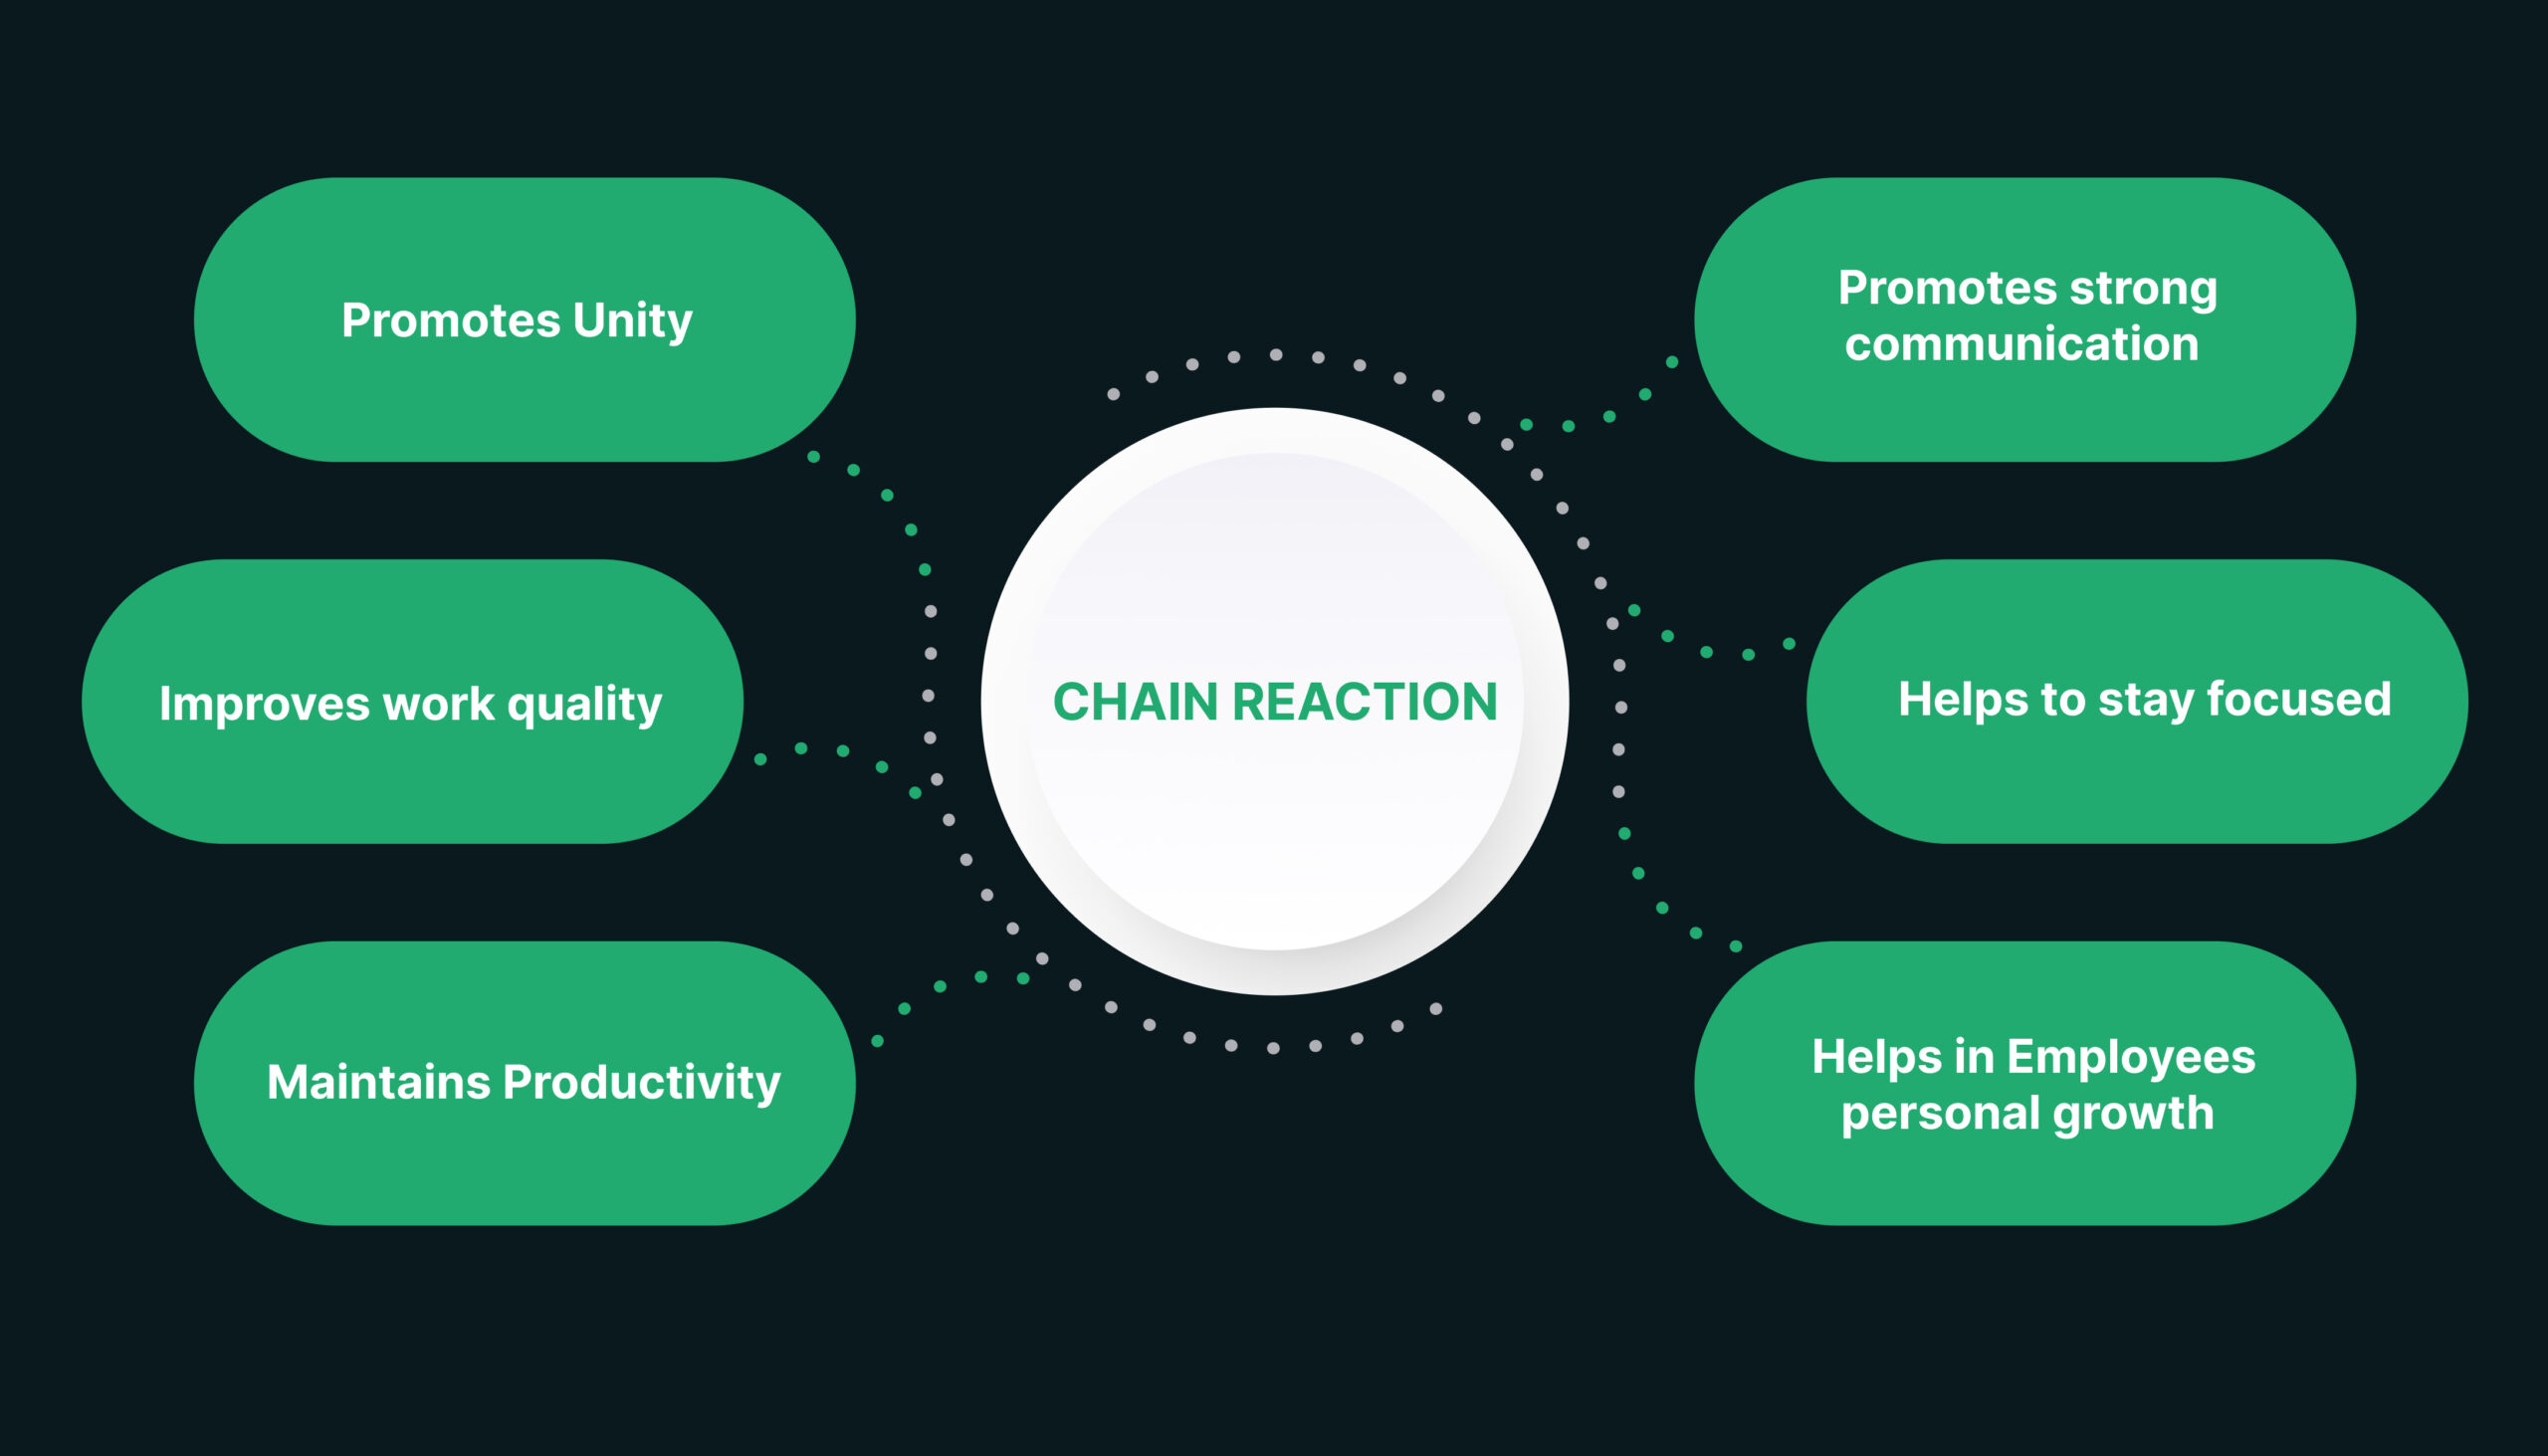 WHAT ARE THE BENEFITS OF A CHAIN REACTION